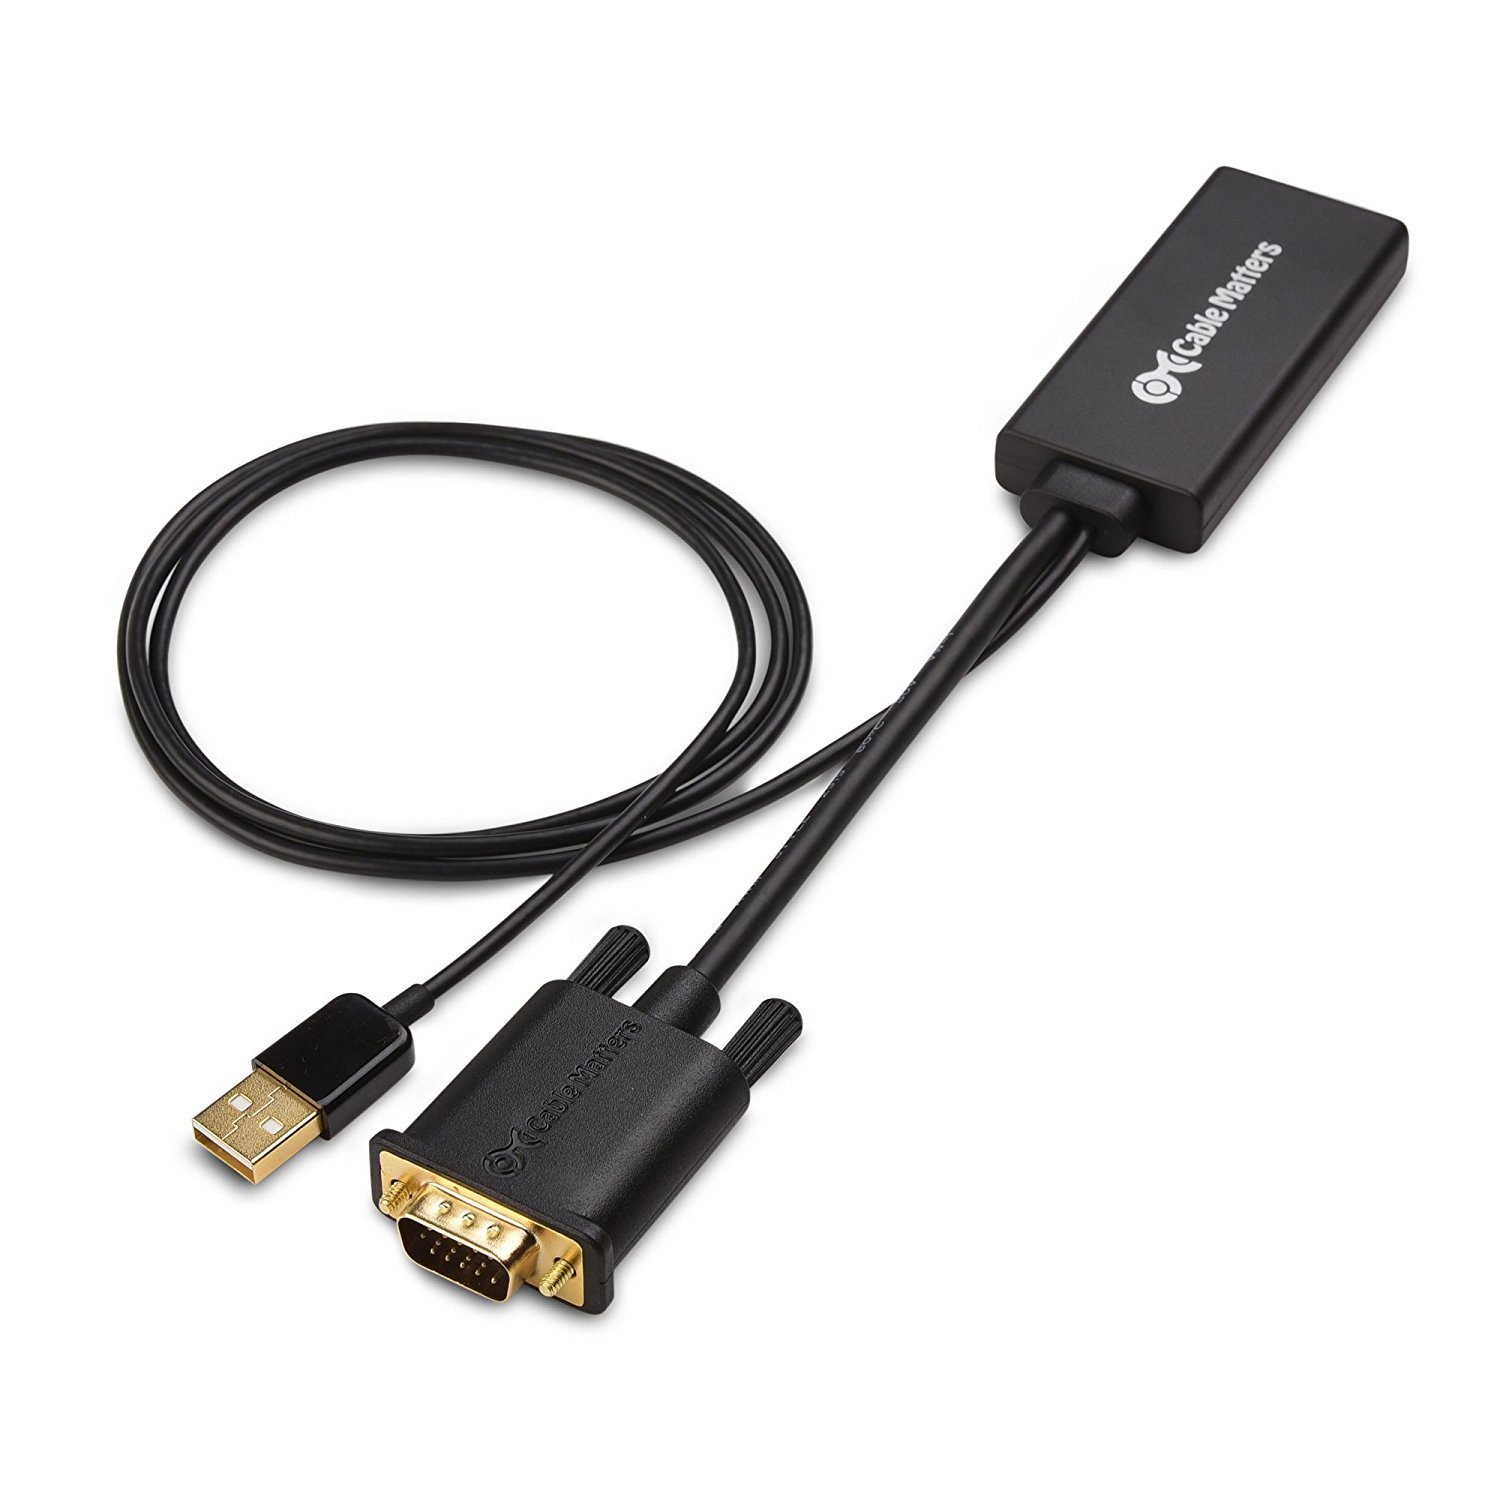 Cable Matters VGA to HDMI Converter (VGA to HDMI Adapter) with Audio Support - image 3 of 4